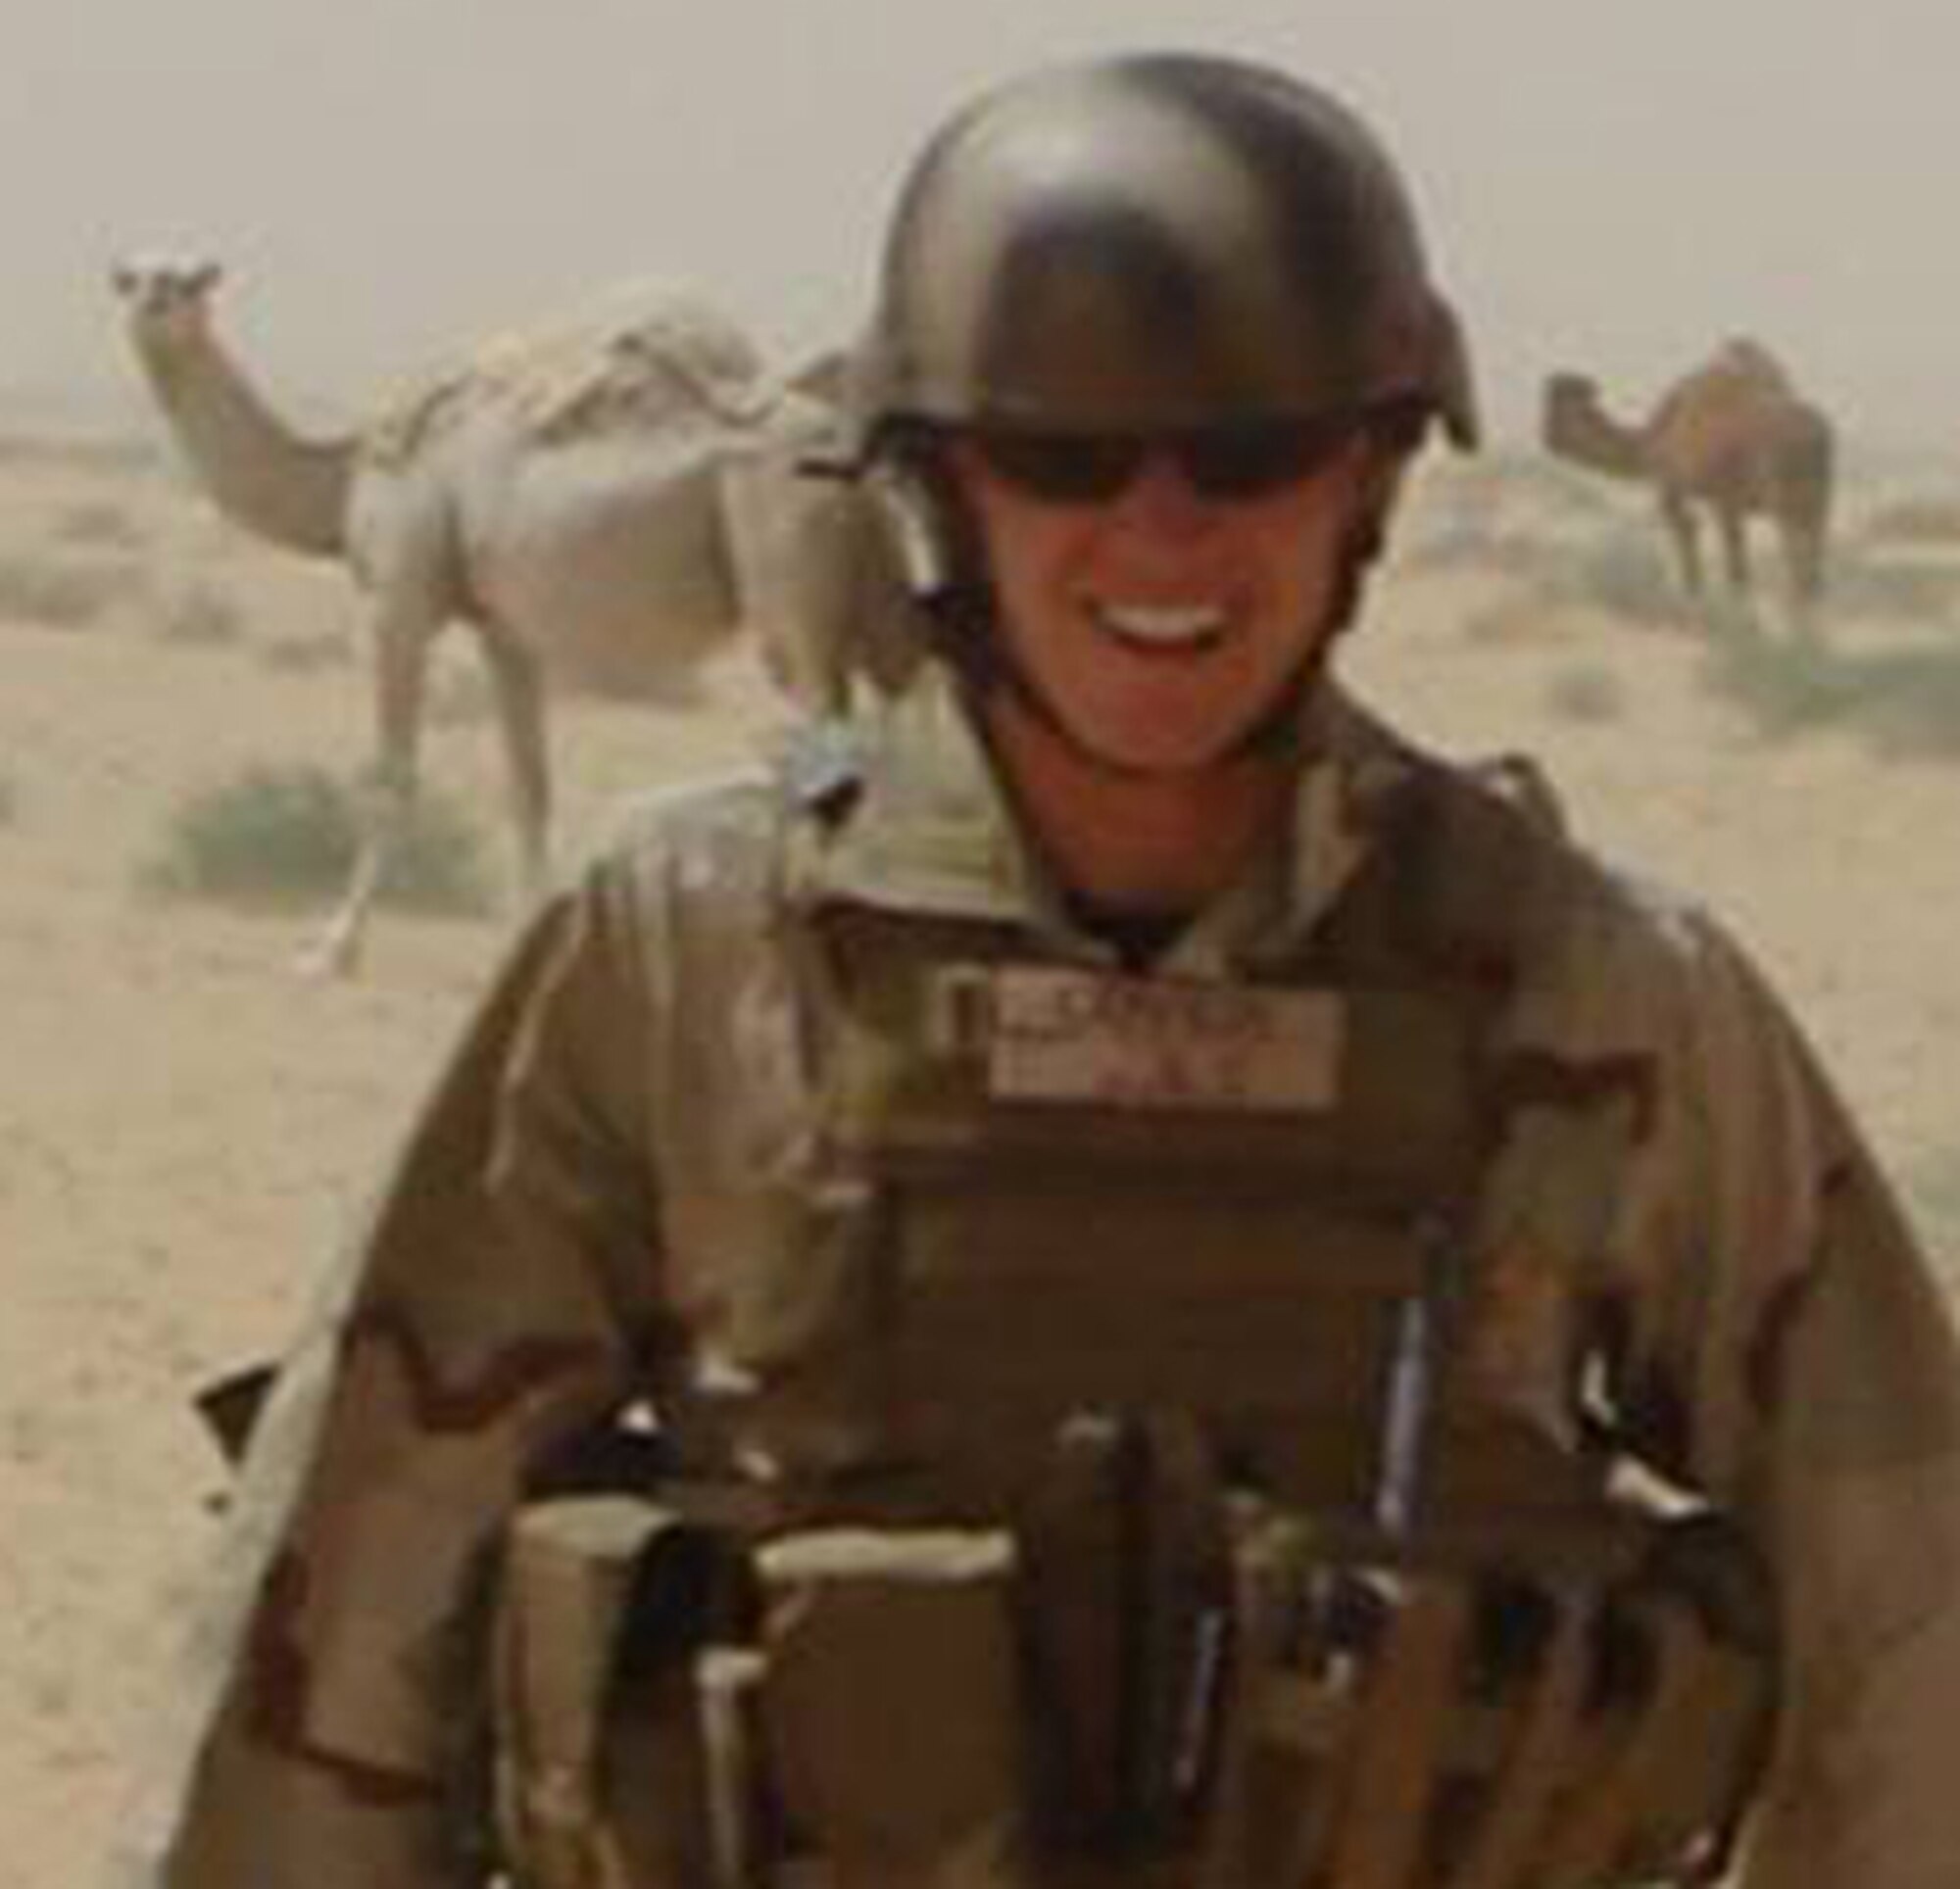 1st Lt. Leon Cover, CGO of the Year. As chief of intelligence operations, Lieutenant Cover deployed in support of Operation Iraqi Freedom.  During this time he led joint patrols for 10-person teams, directed troops under fire on five engagements and protected an unarmed search team with zero U. S. casualties. He also commanded and trained 57 joint personnel on convoy operations, and planned and led 26 OIF combat convoy operations. Lieutenant Cover volunteered 90 hours in support of a local church and community kitchen. (Courtesy photo)